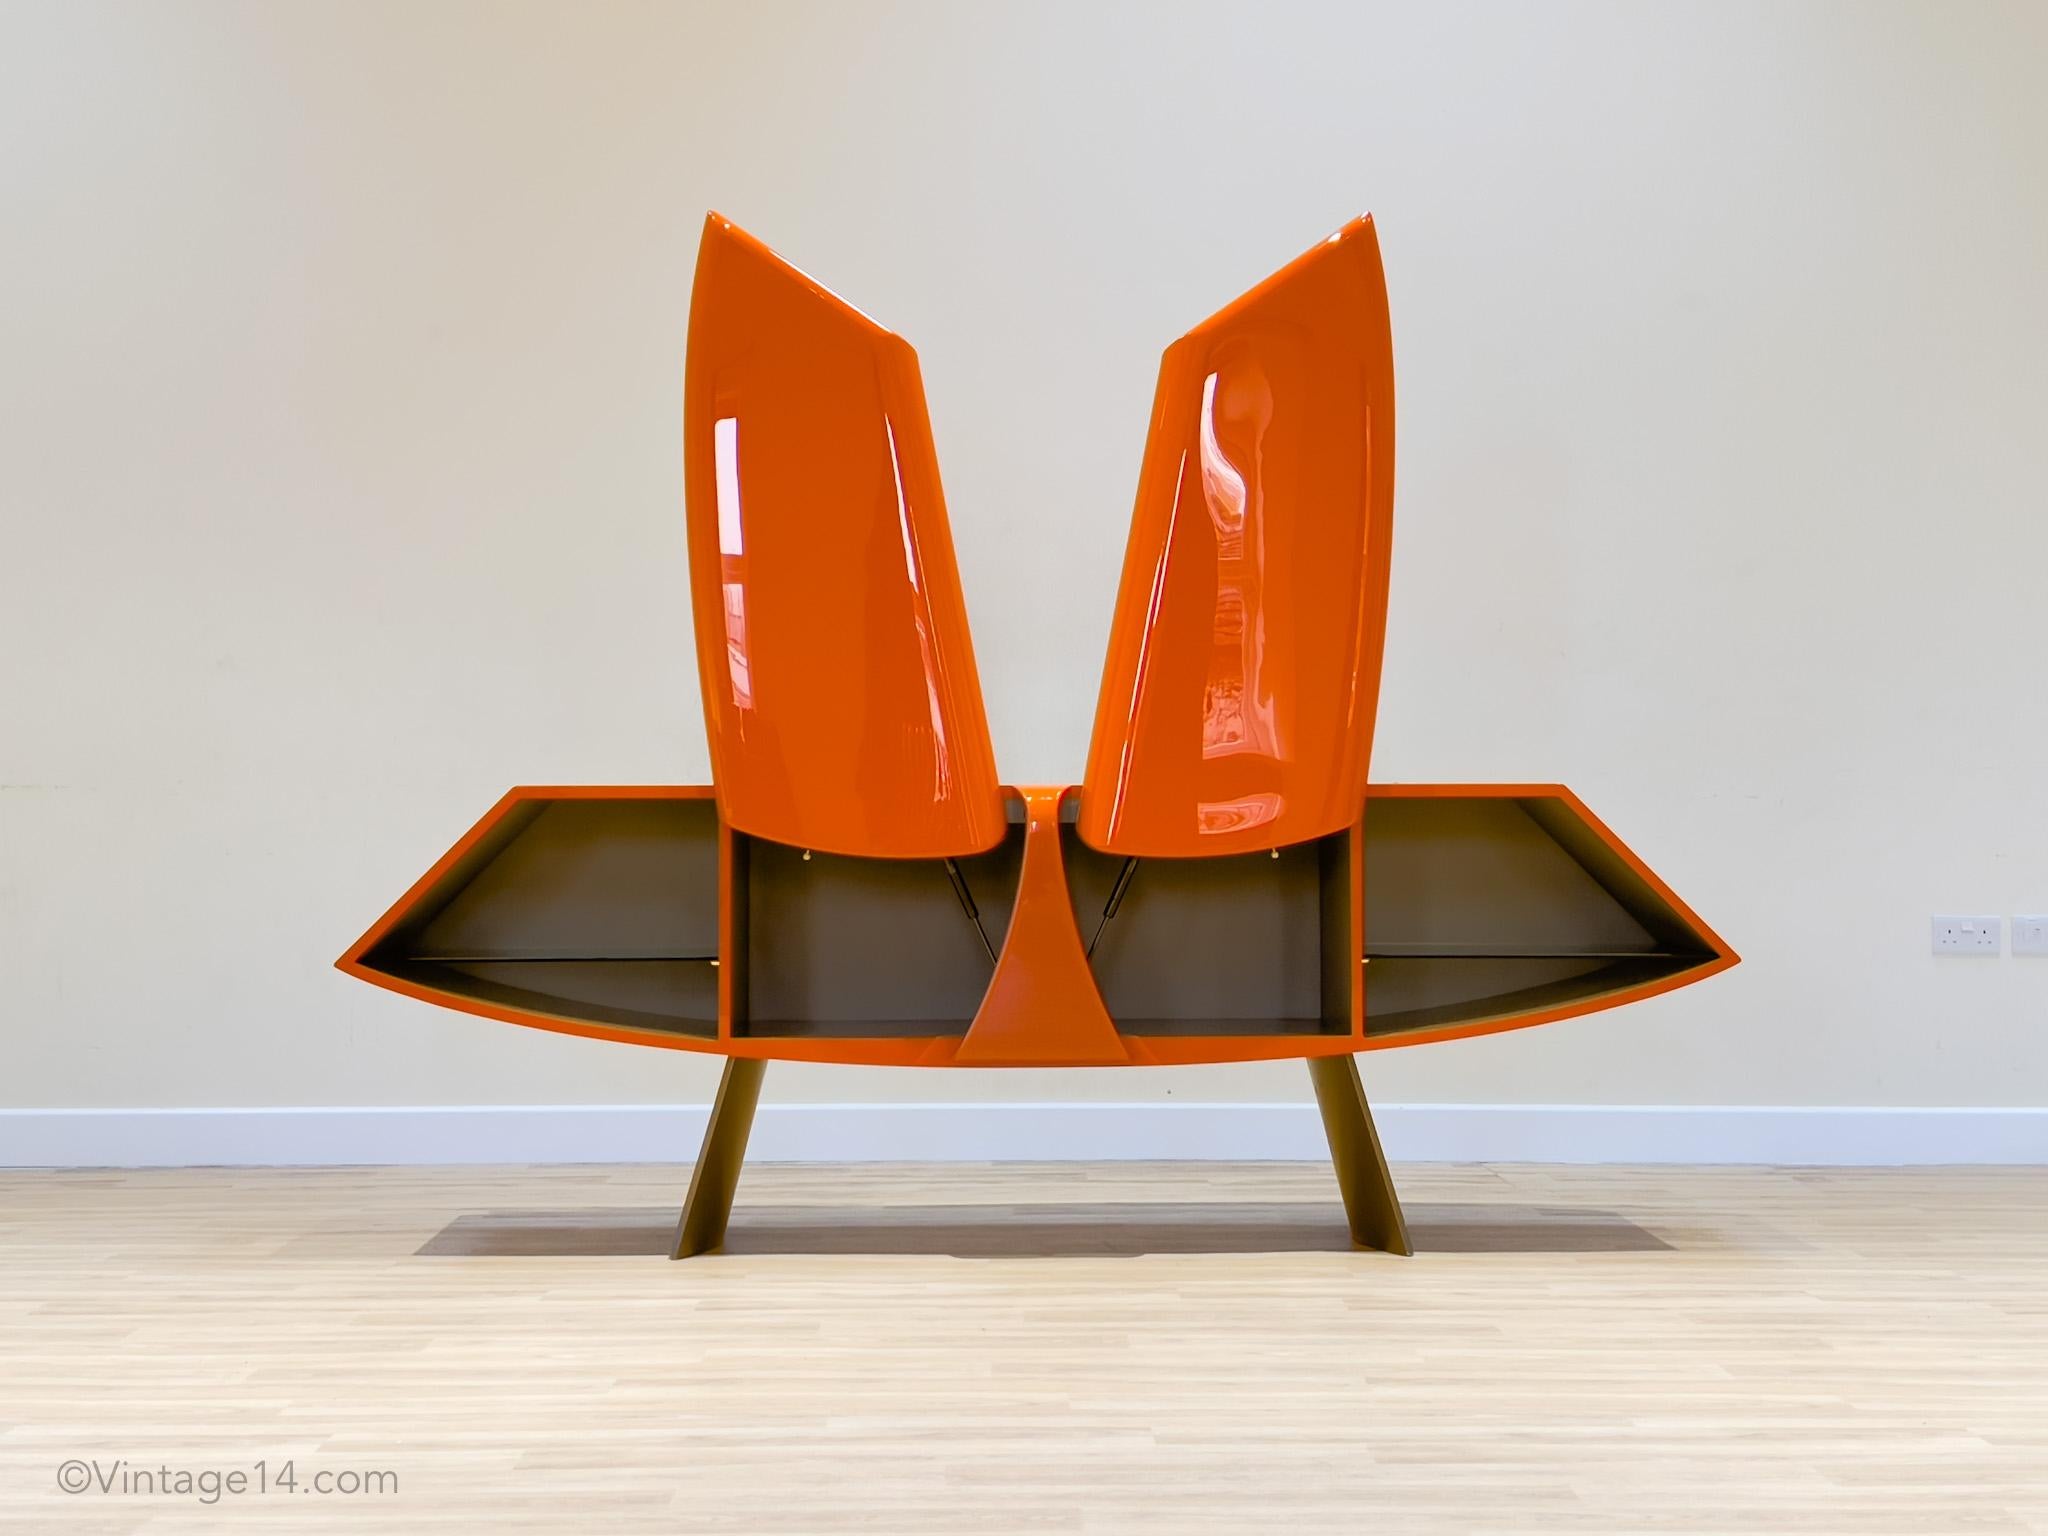 Sideboard by René Bouchara for Roche Bobbois. number 92/400

Born in Paris and educated in New York, René Bouchara imagined a sideboard which evoked images of the grace of a butterfly and at the same time the elegance of a sports car.‎ The glossy